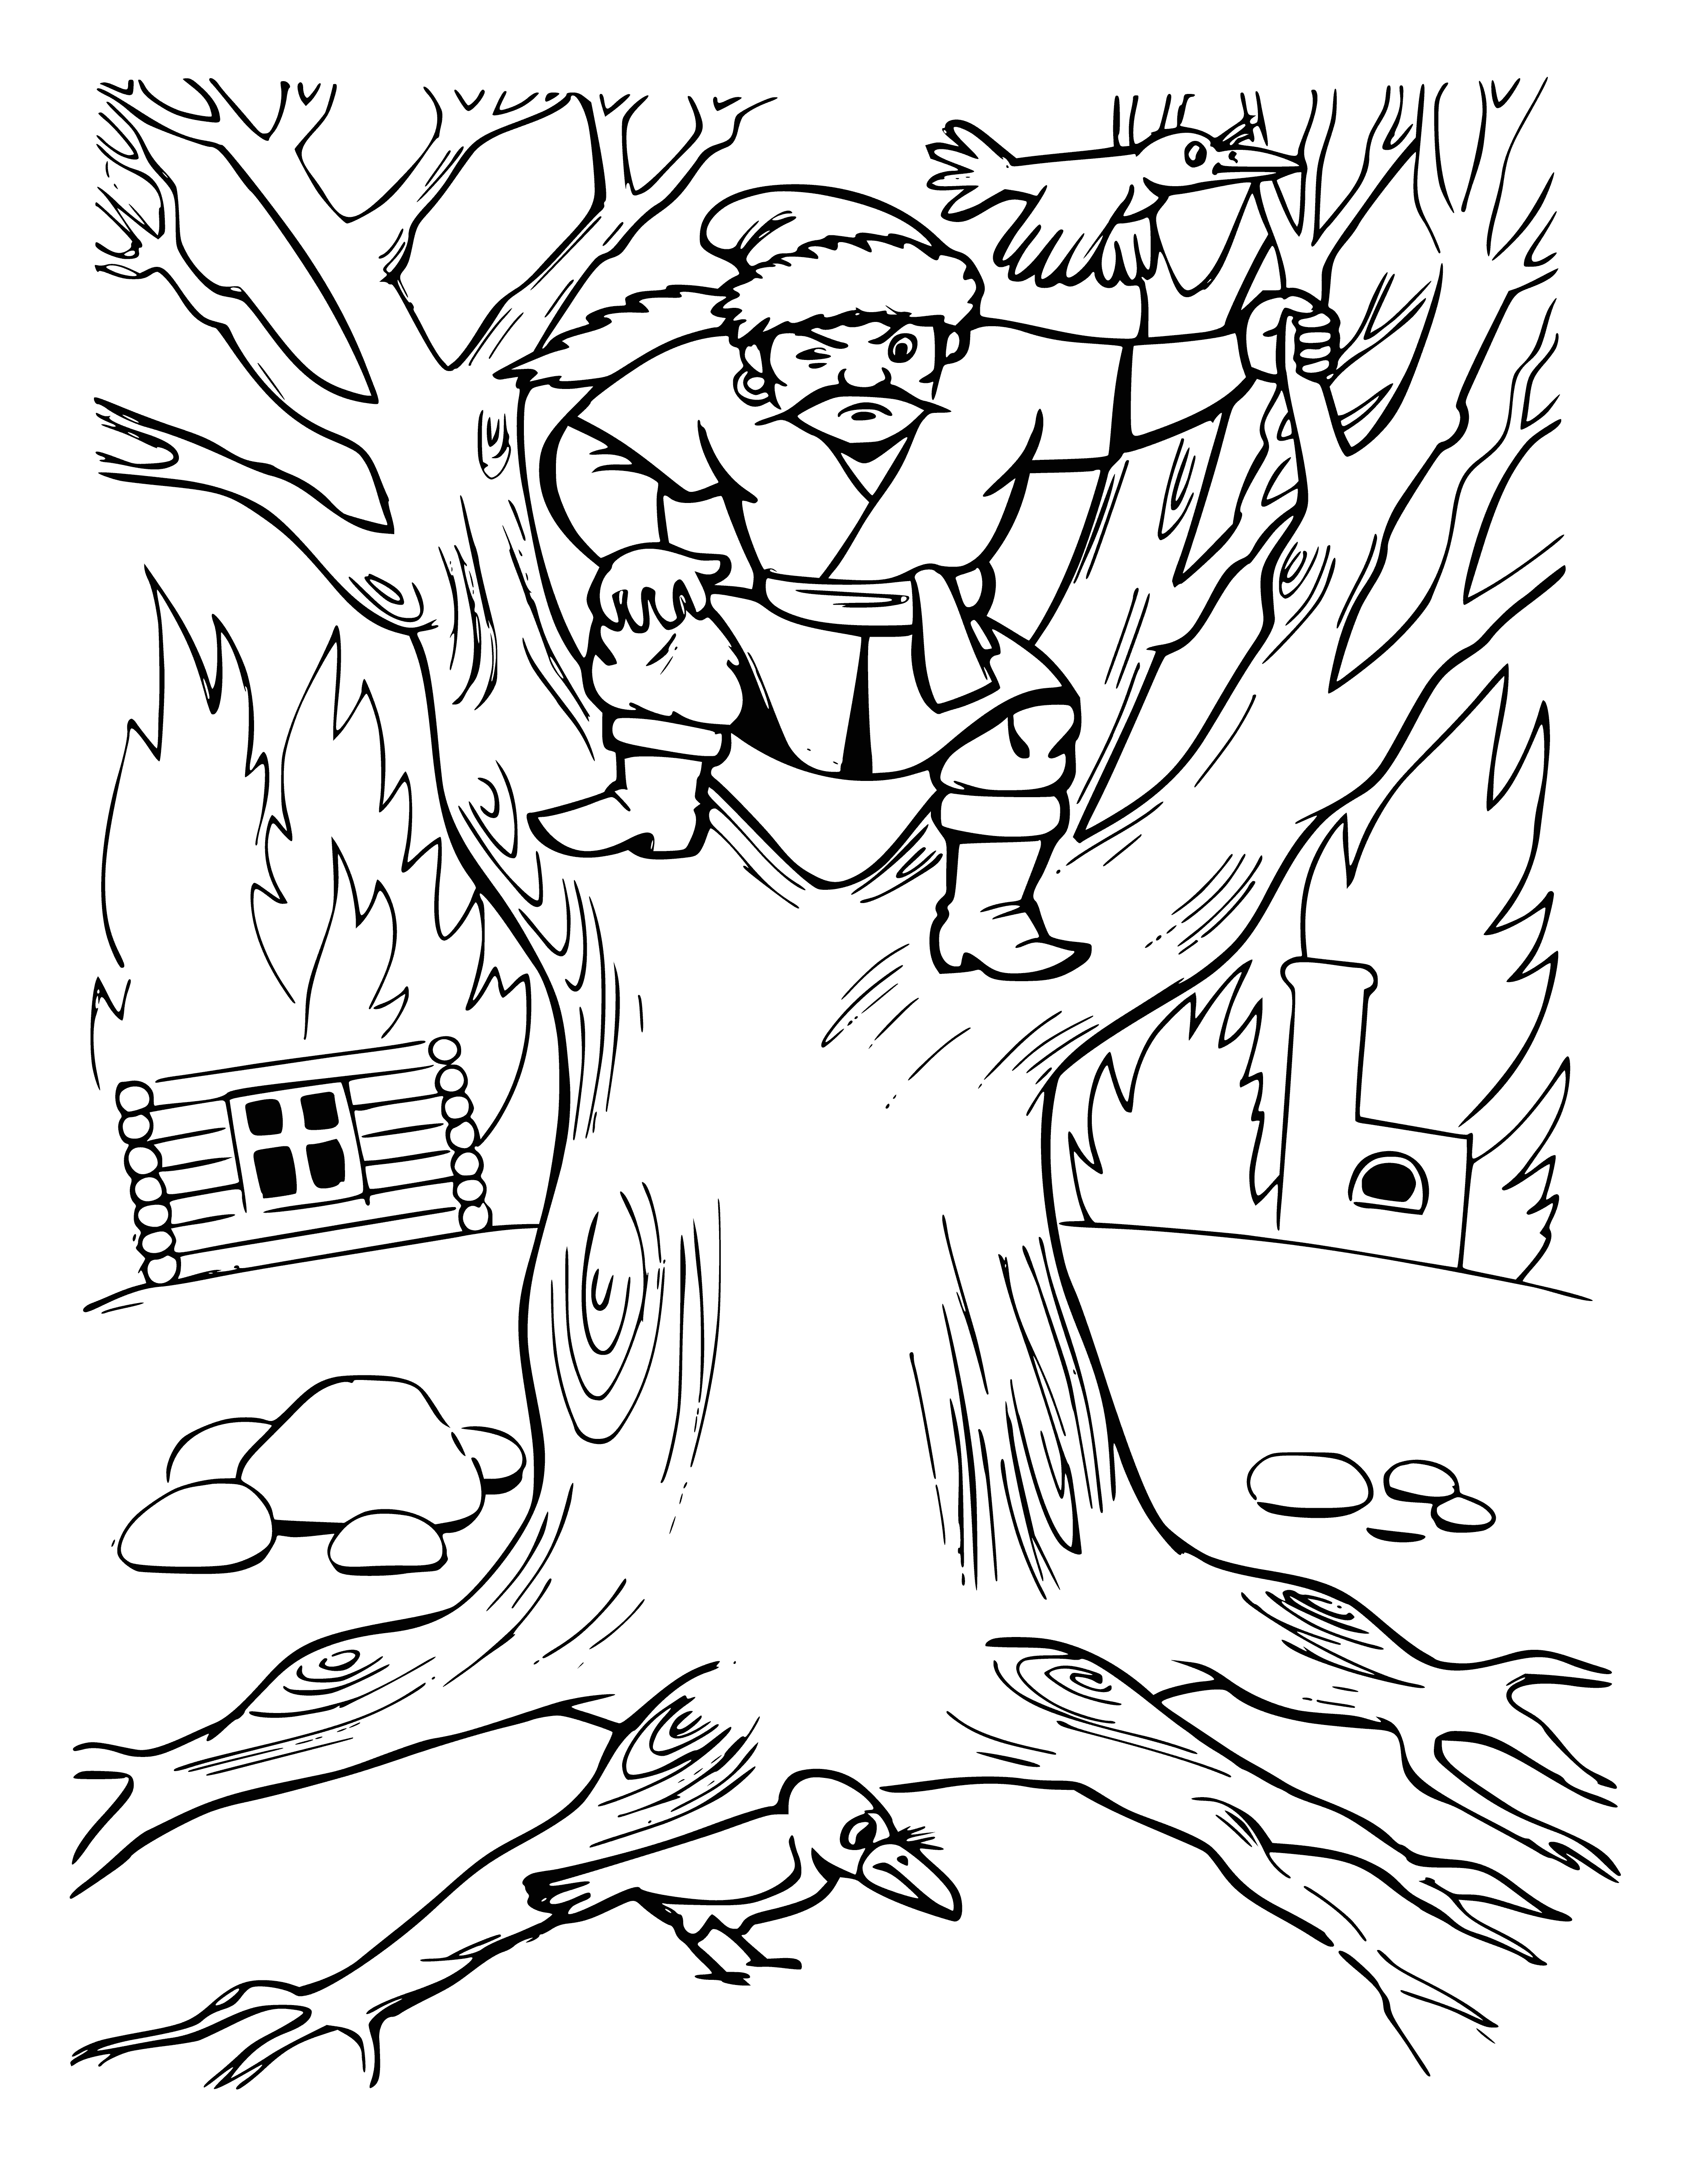 Nightingale the robber coloring page